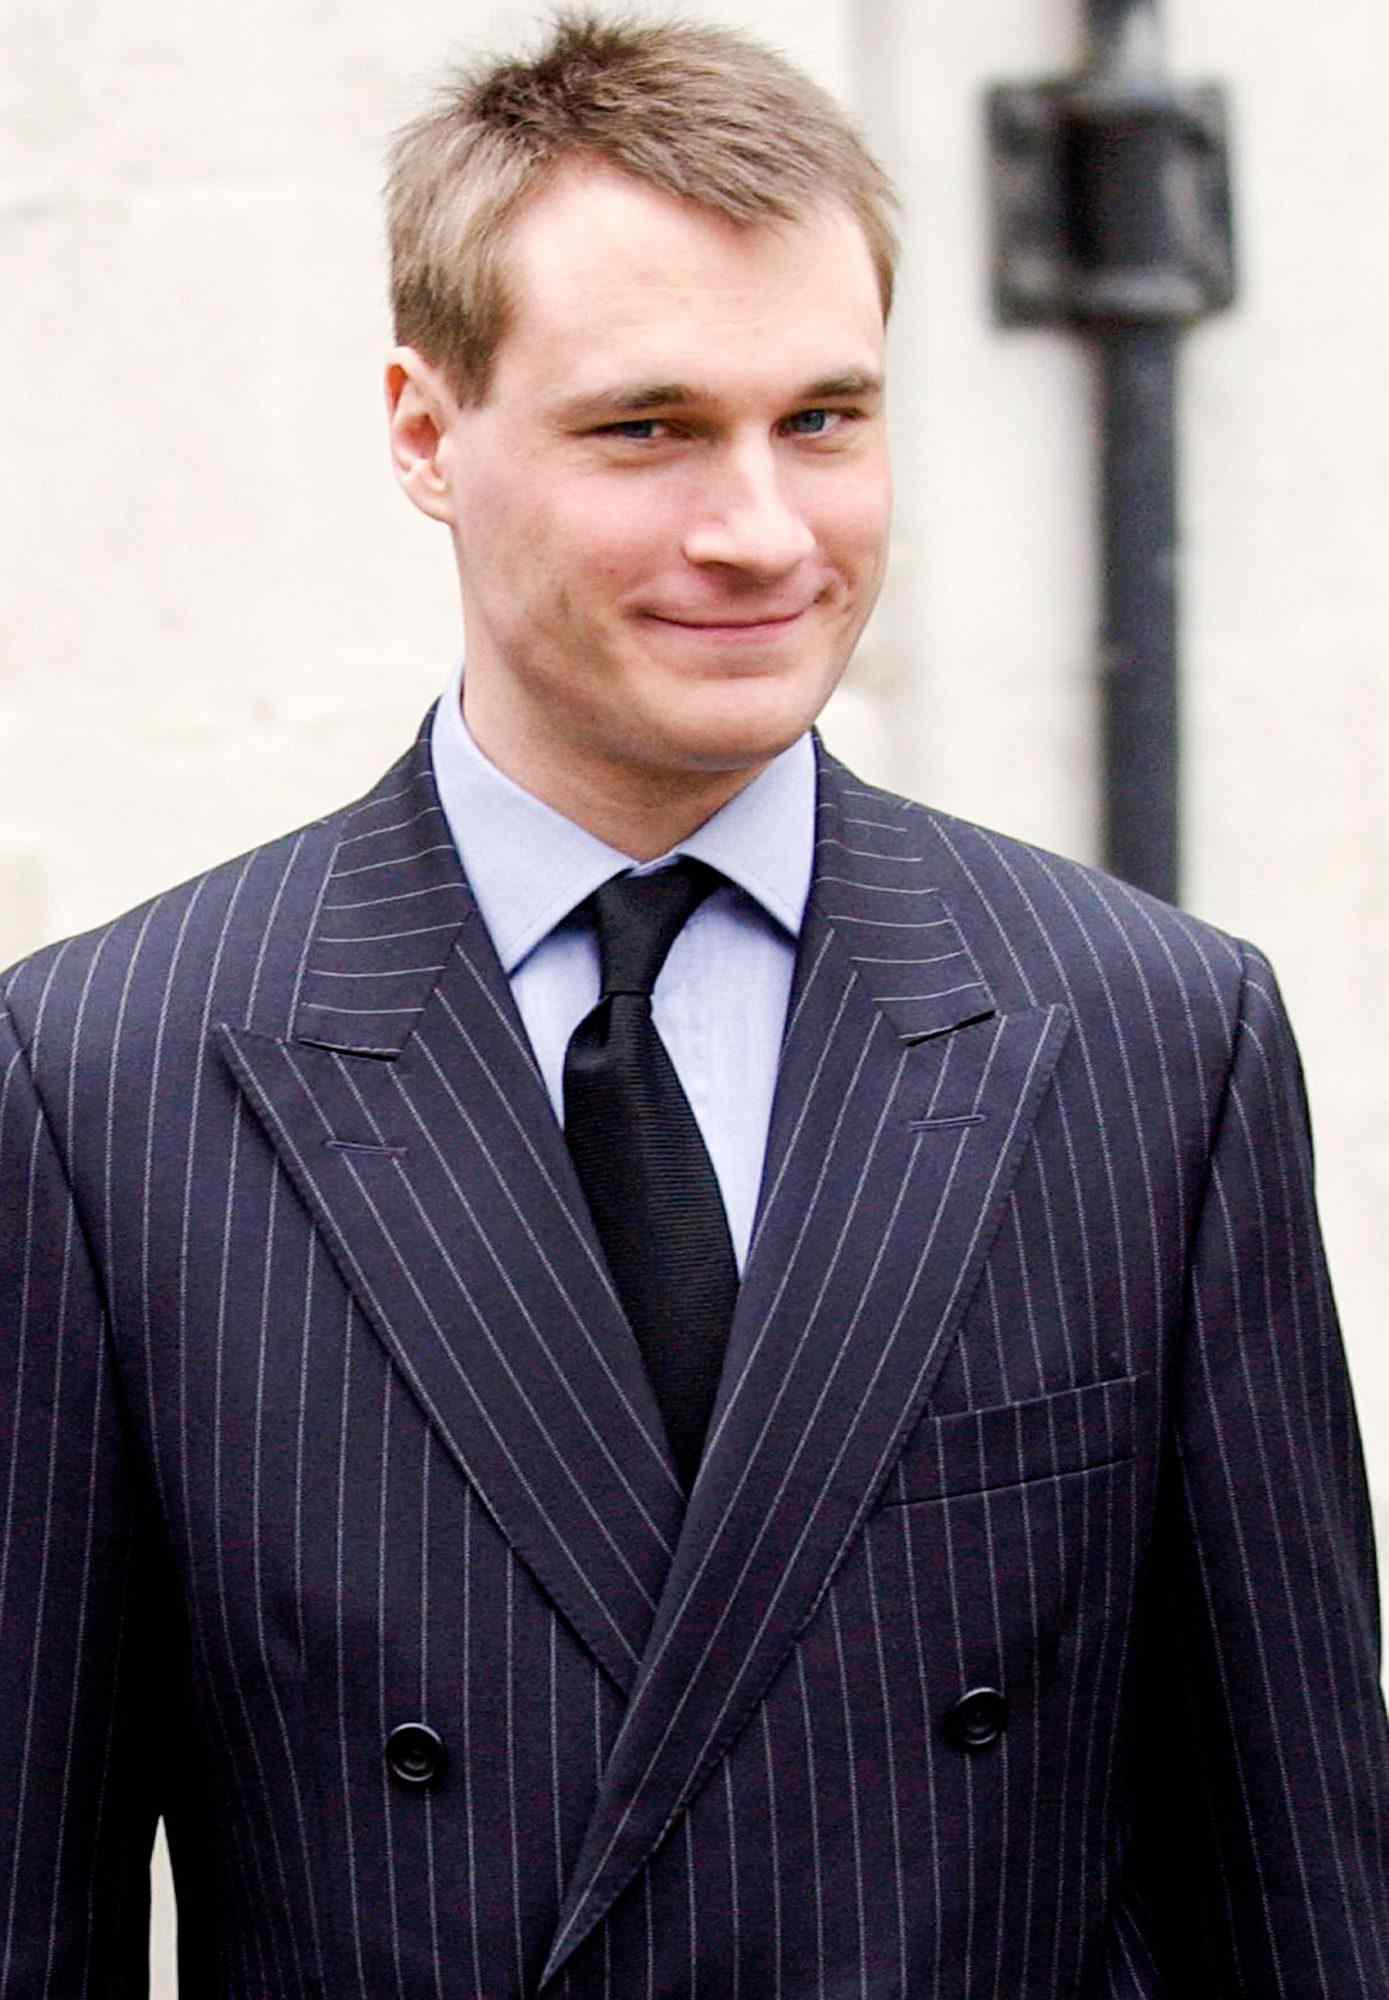 <p>The only son of Prince Richard, Duke of Gloucester, and Birgitte, Duchess of Gloucester. He's currently 32nd in line to the throne. He's also the heir apparent to the dukedom of Gloucester.</p>
                            